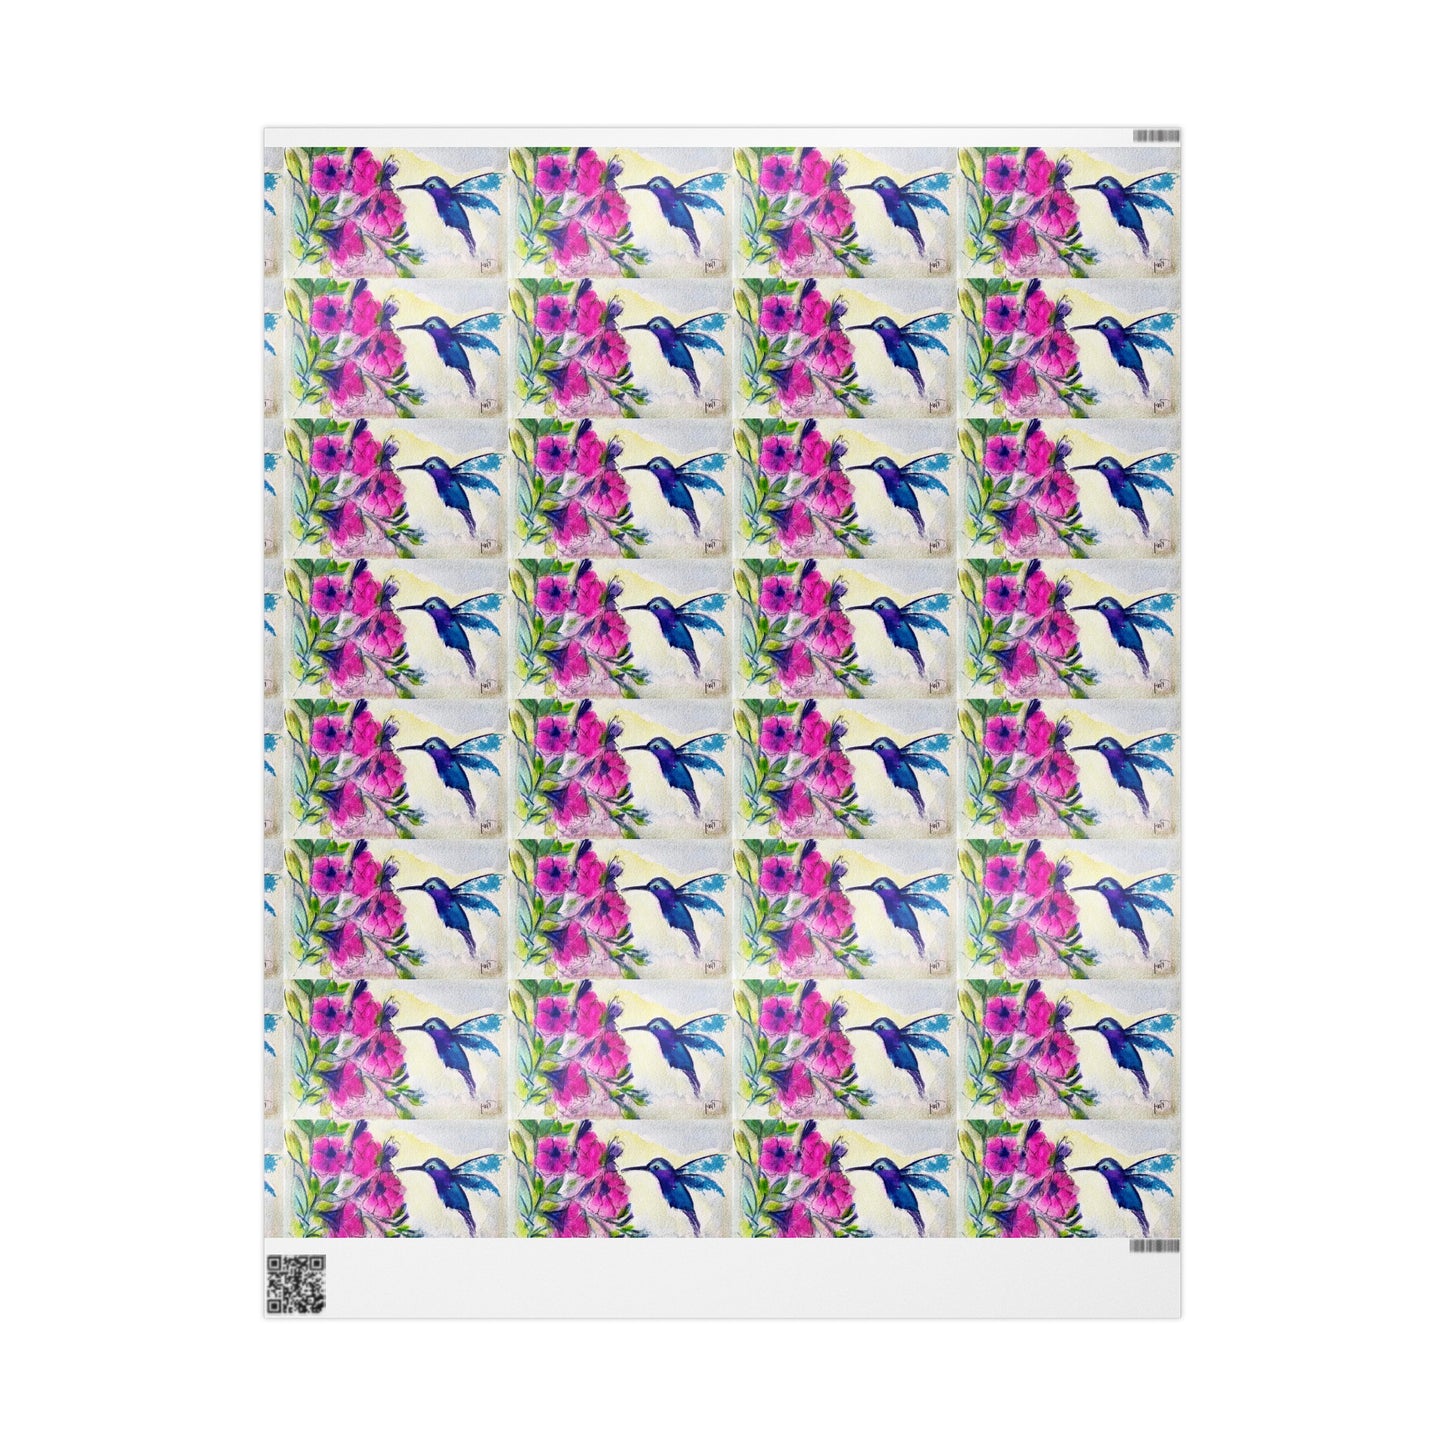 Hummingbird with Pink Flowers (3 Sizes) Wrapping Papers